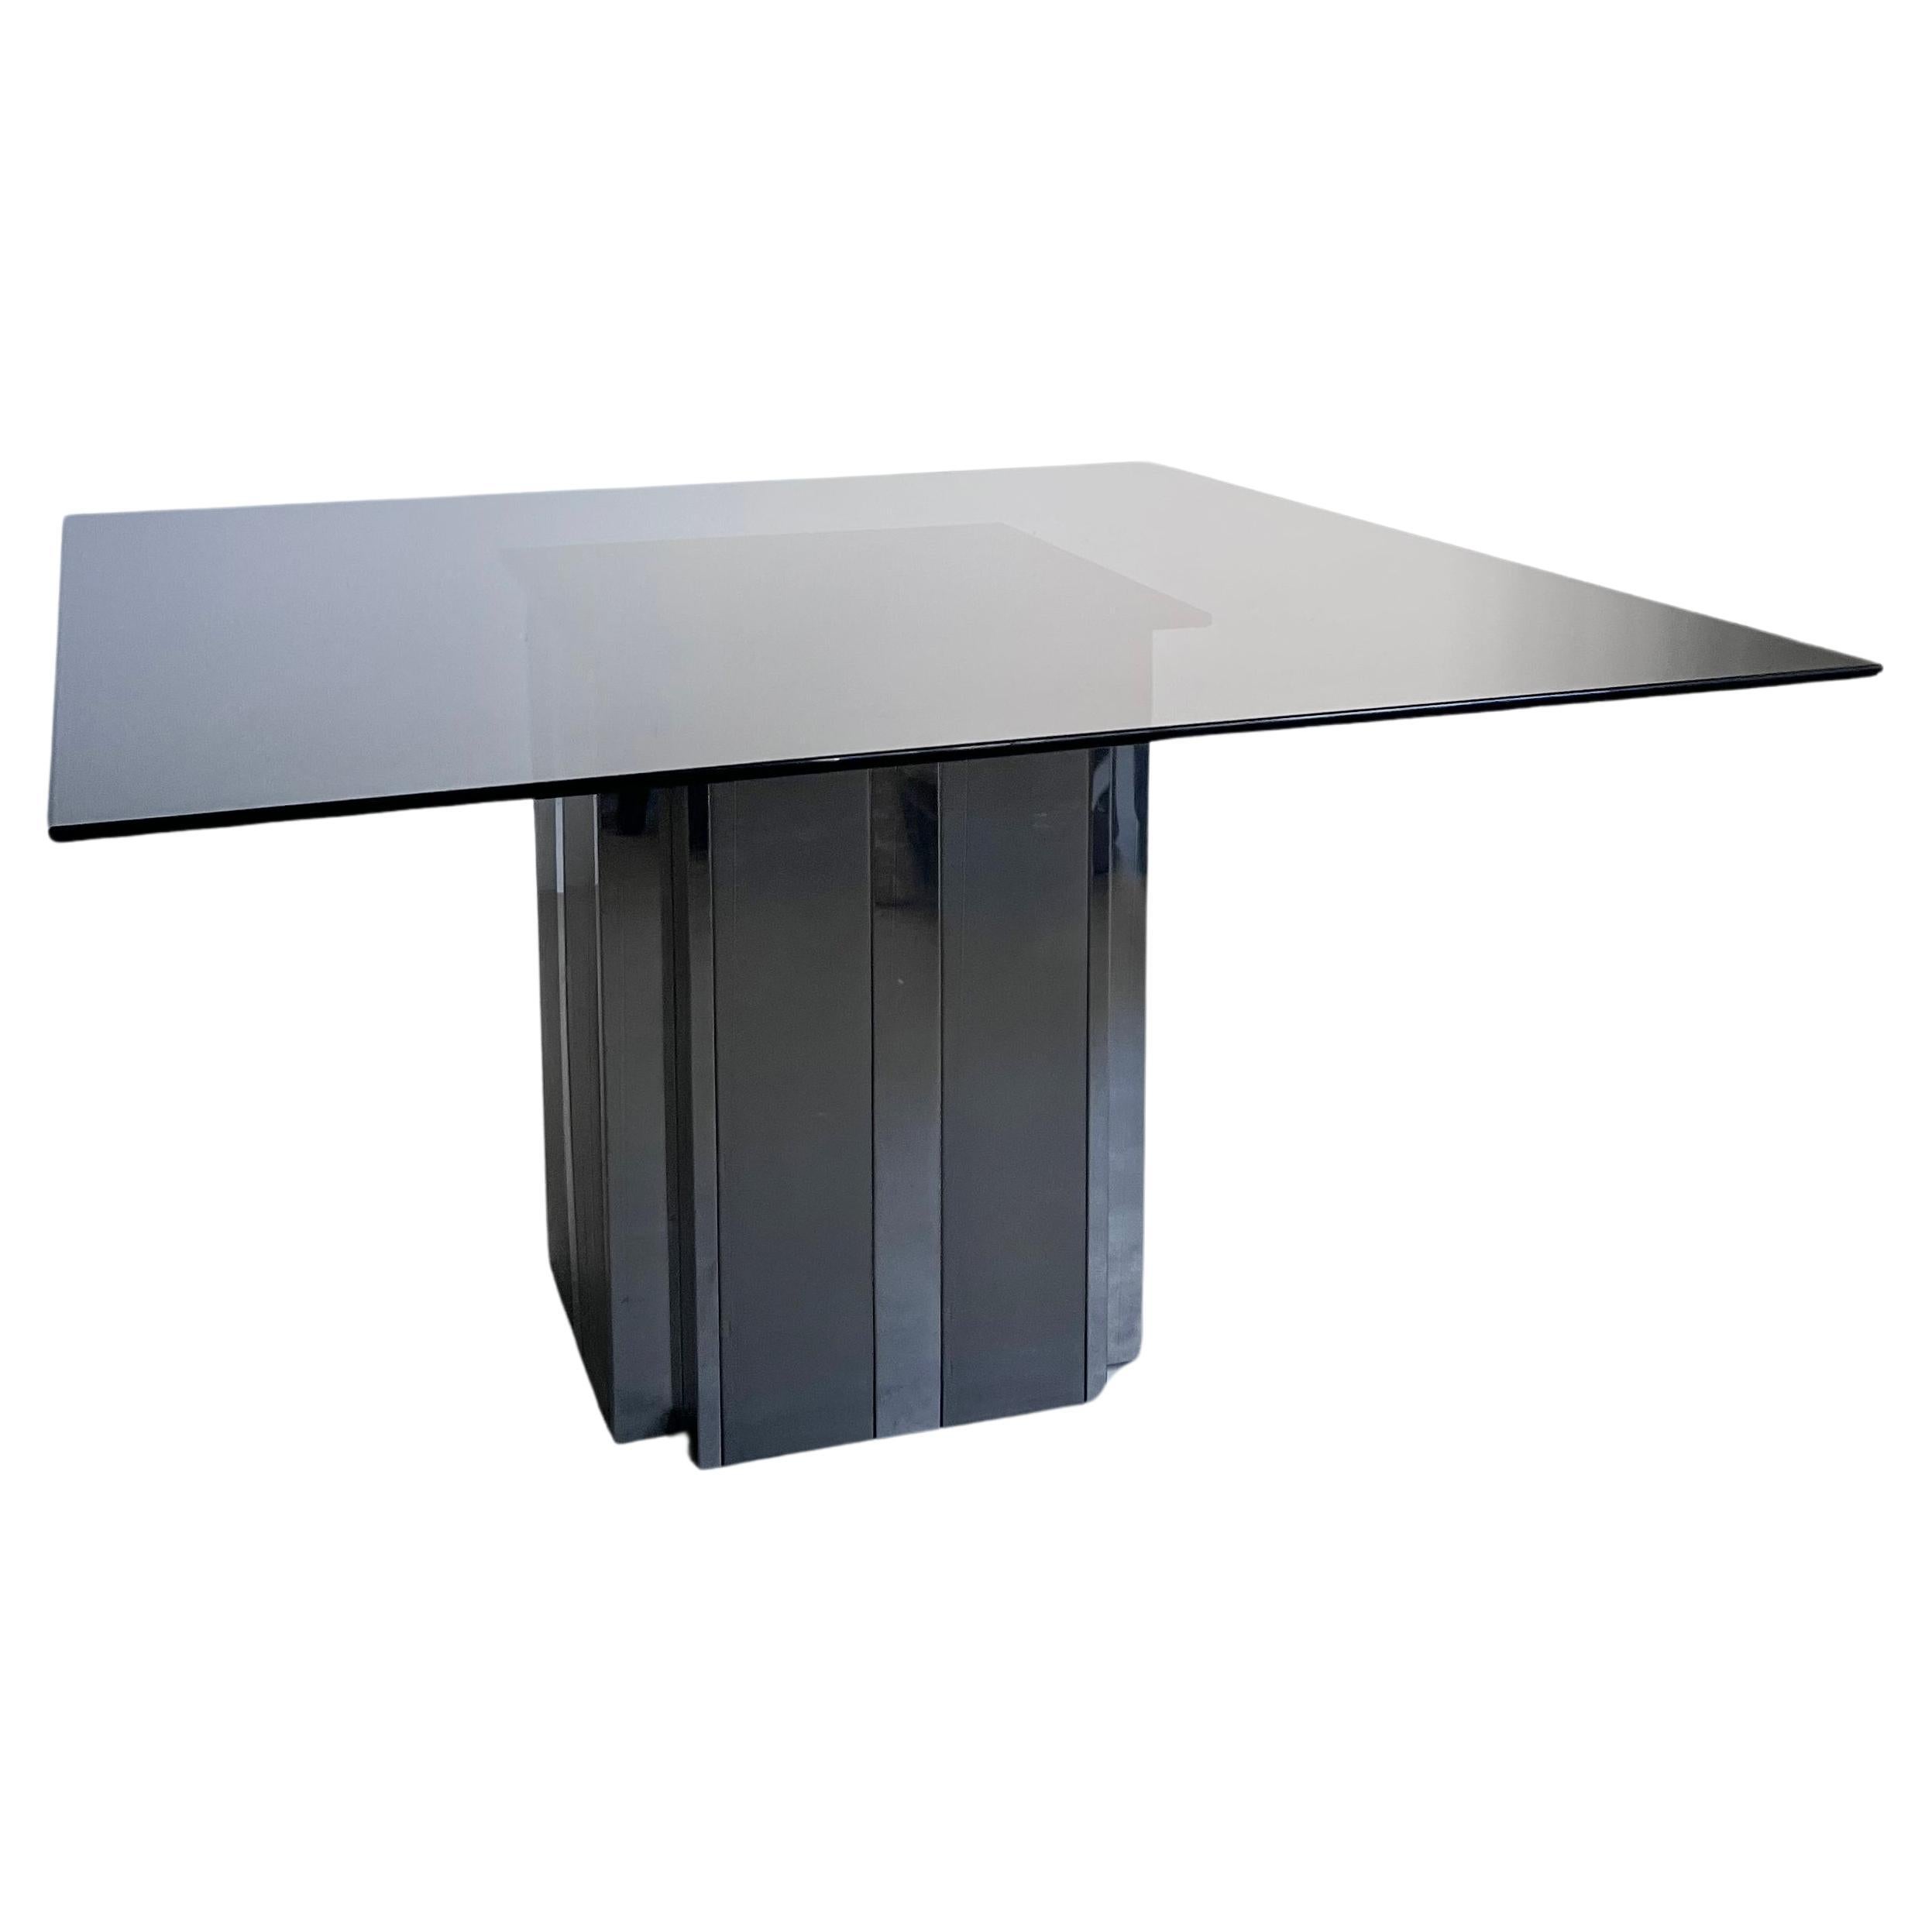 Square Dining Table in Metal and Smoked Glass, 1970's Paul Evans Style For Sale